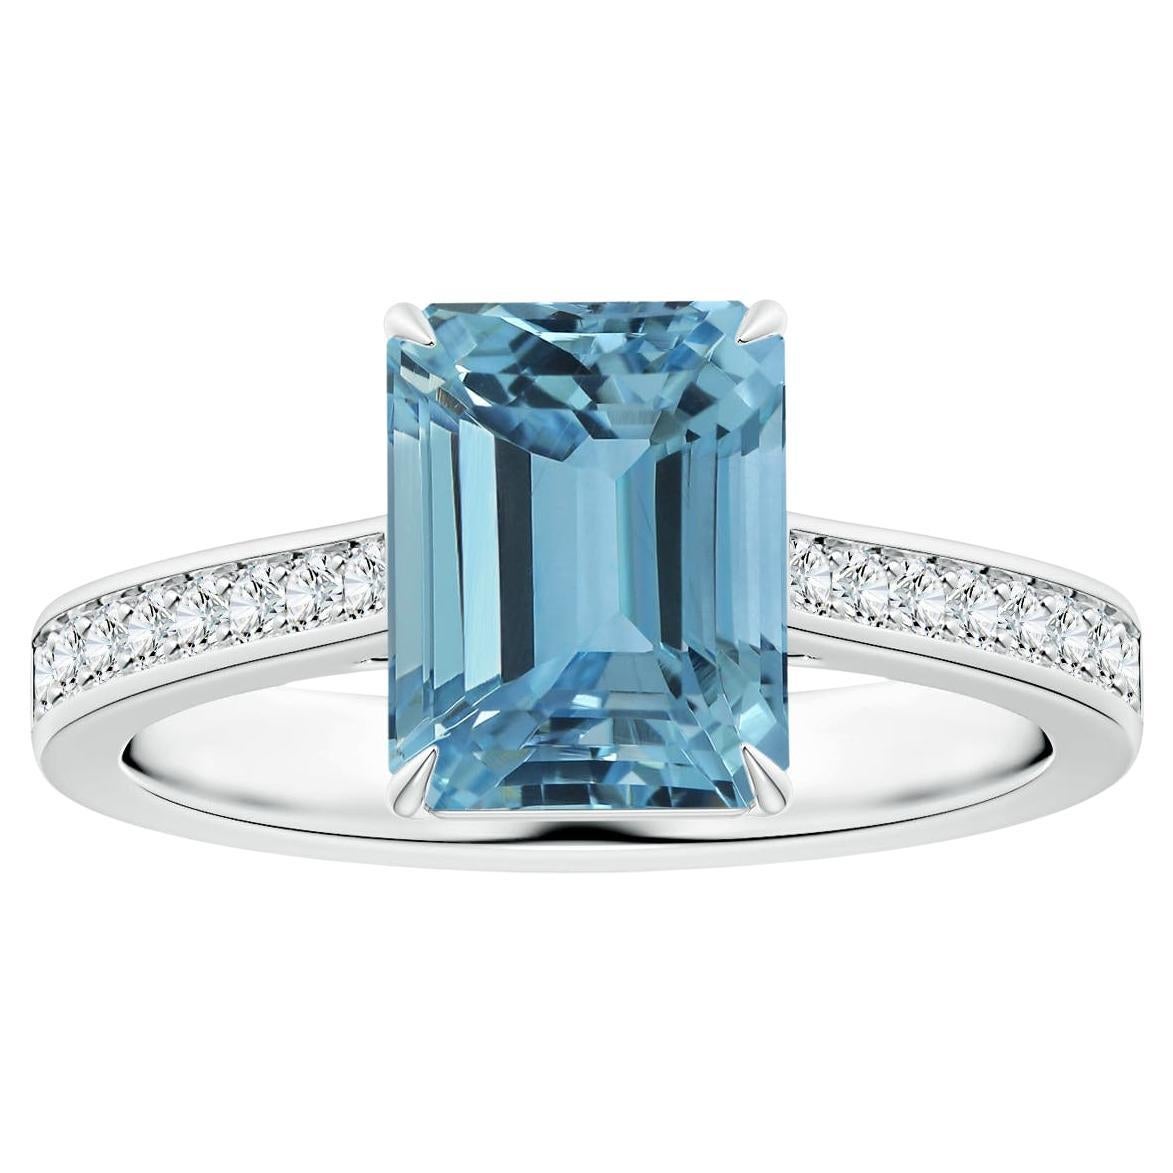 For Sale:  ANGARA GIA Certified Emerald-Cut Aquamarine Ring in White Gold with Diamonds